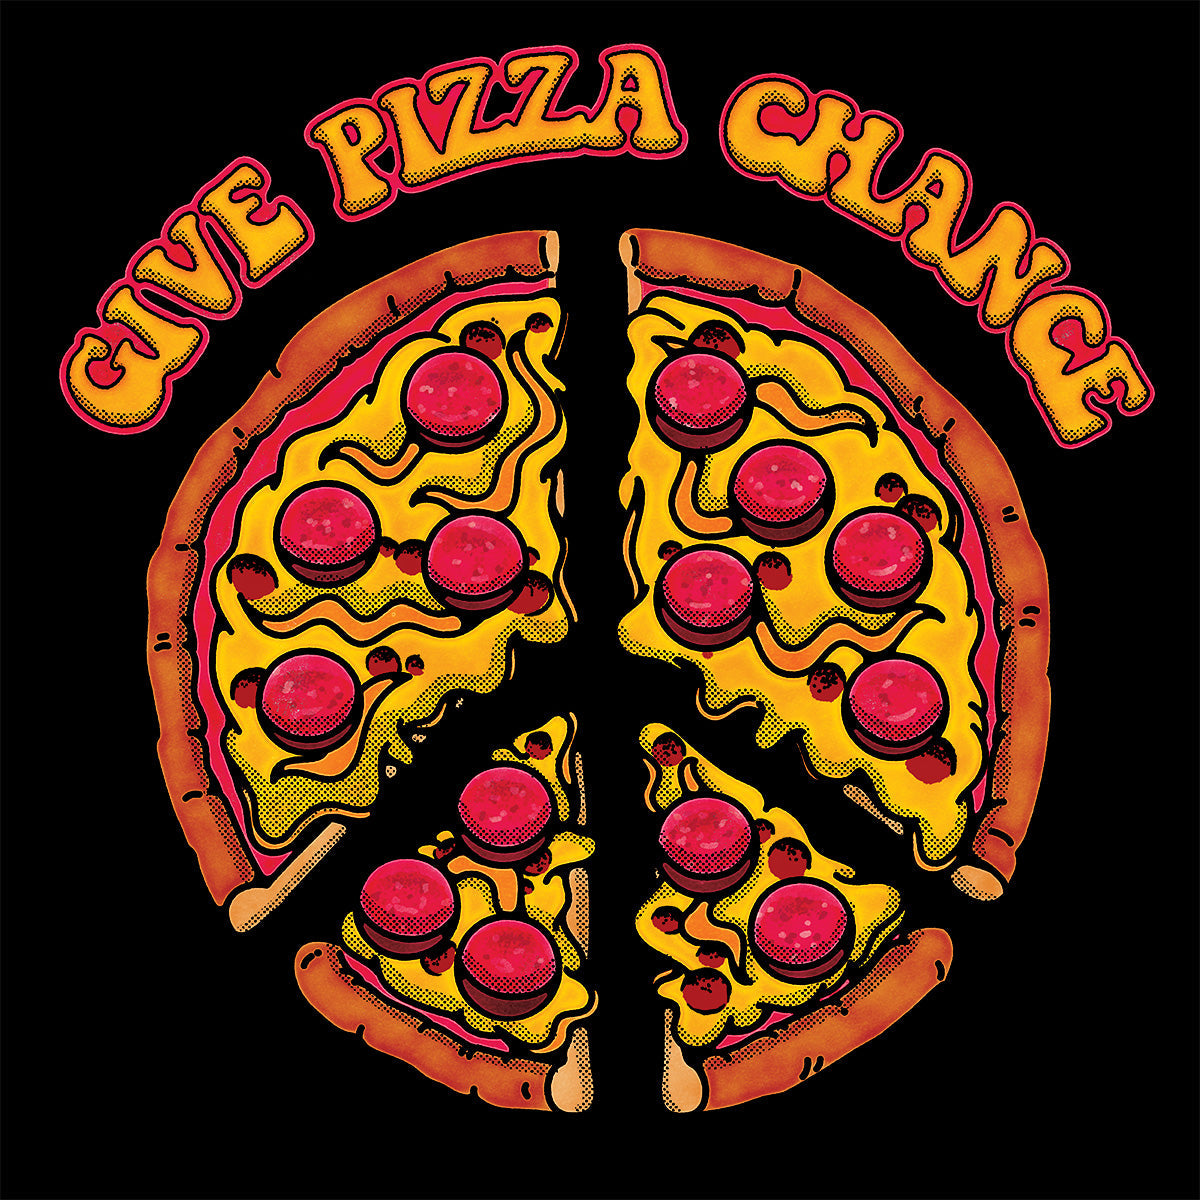 Give Pizza Chance Funny Peace Sign Parody Pun Foodie Cotton T-Shirt